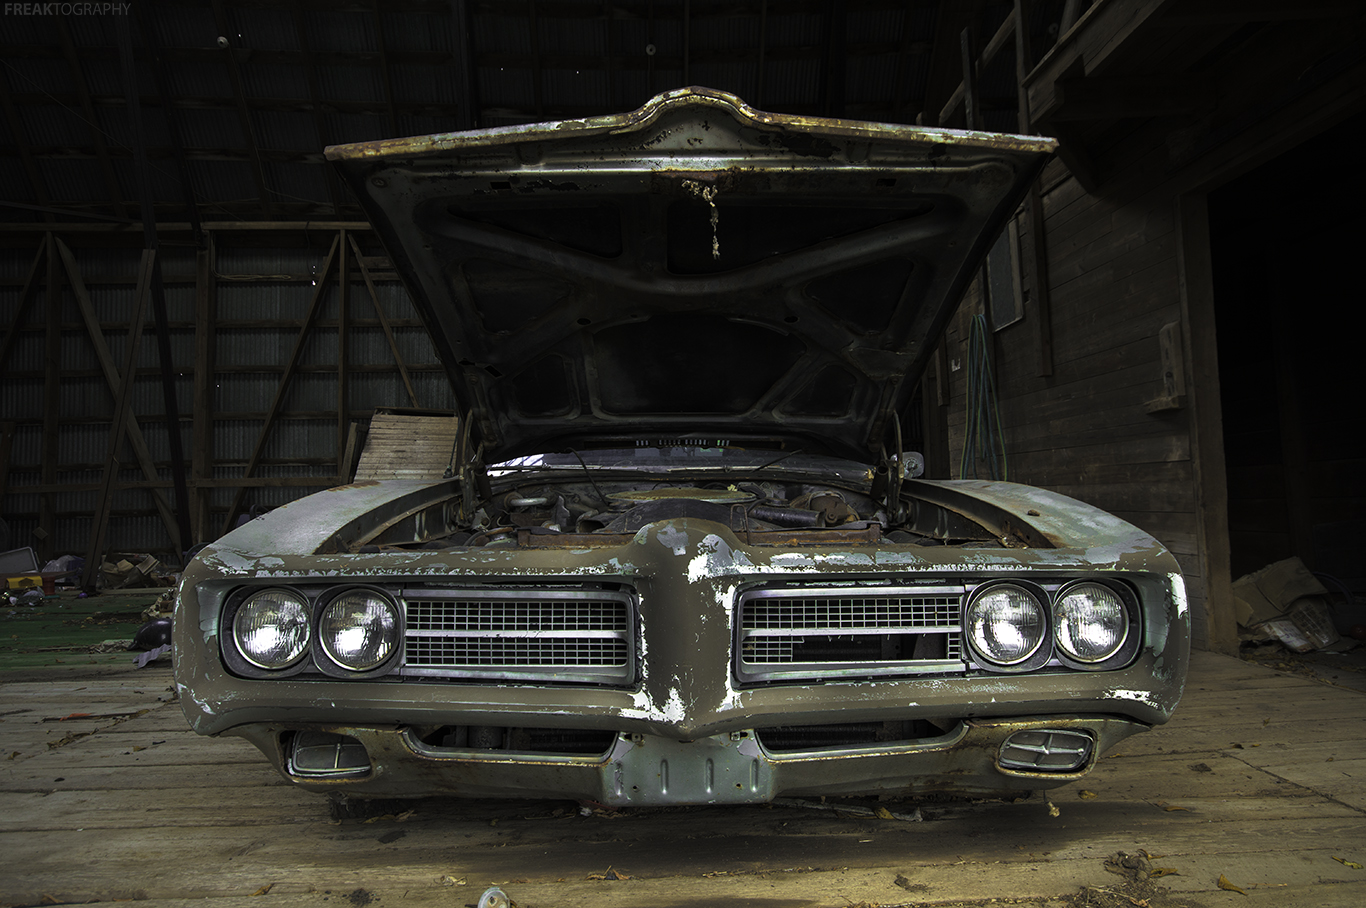 An abandoned car found in the barn of an old derelct house in Ontario Canada.